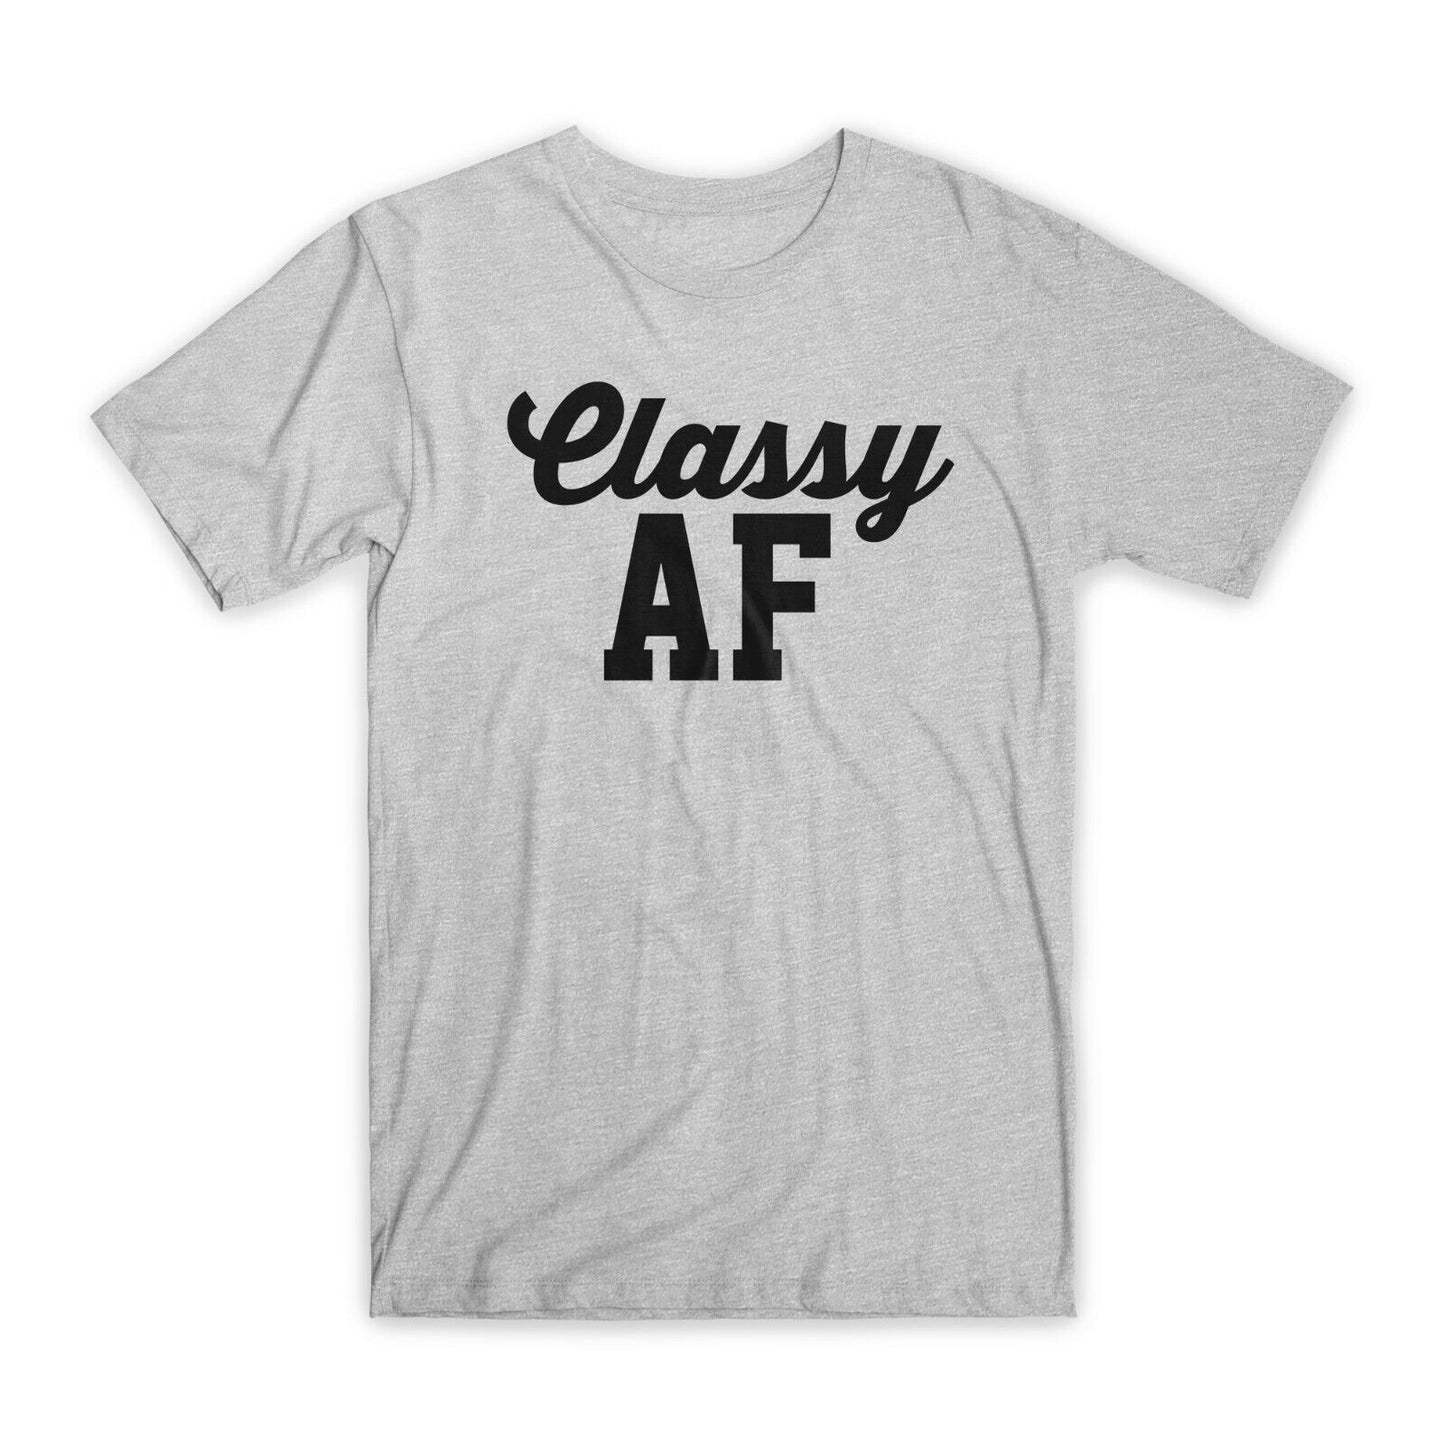 Classy AF Print T-Shirt Premium Soft Cotton Crew Neck Funny Tee Novelty Gift NEW